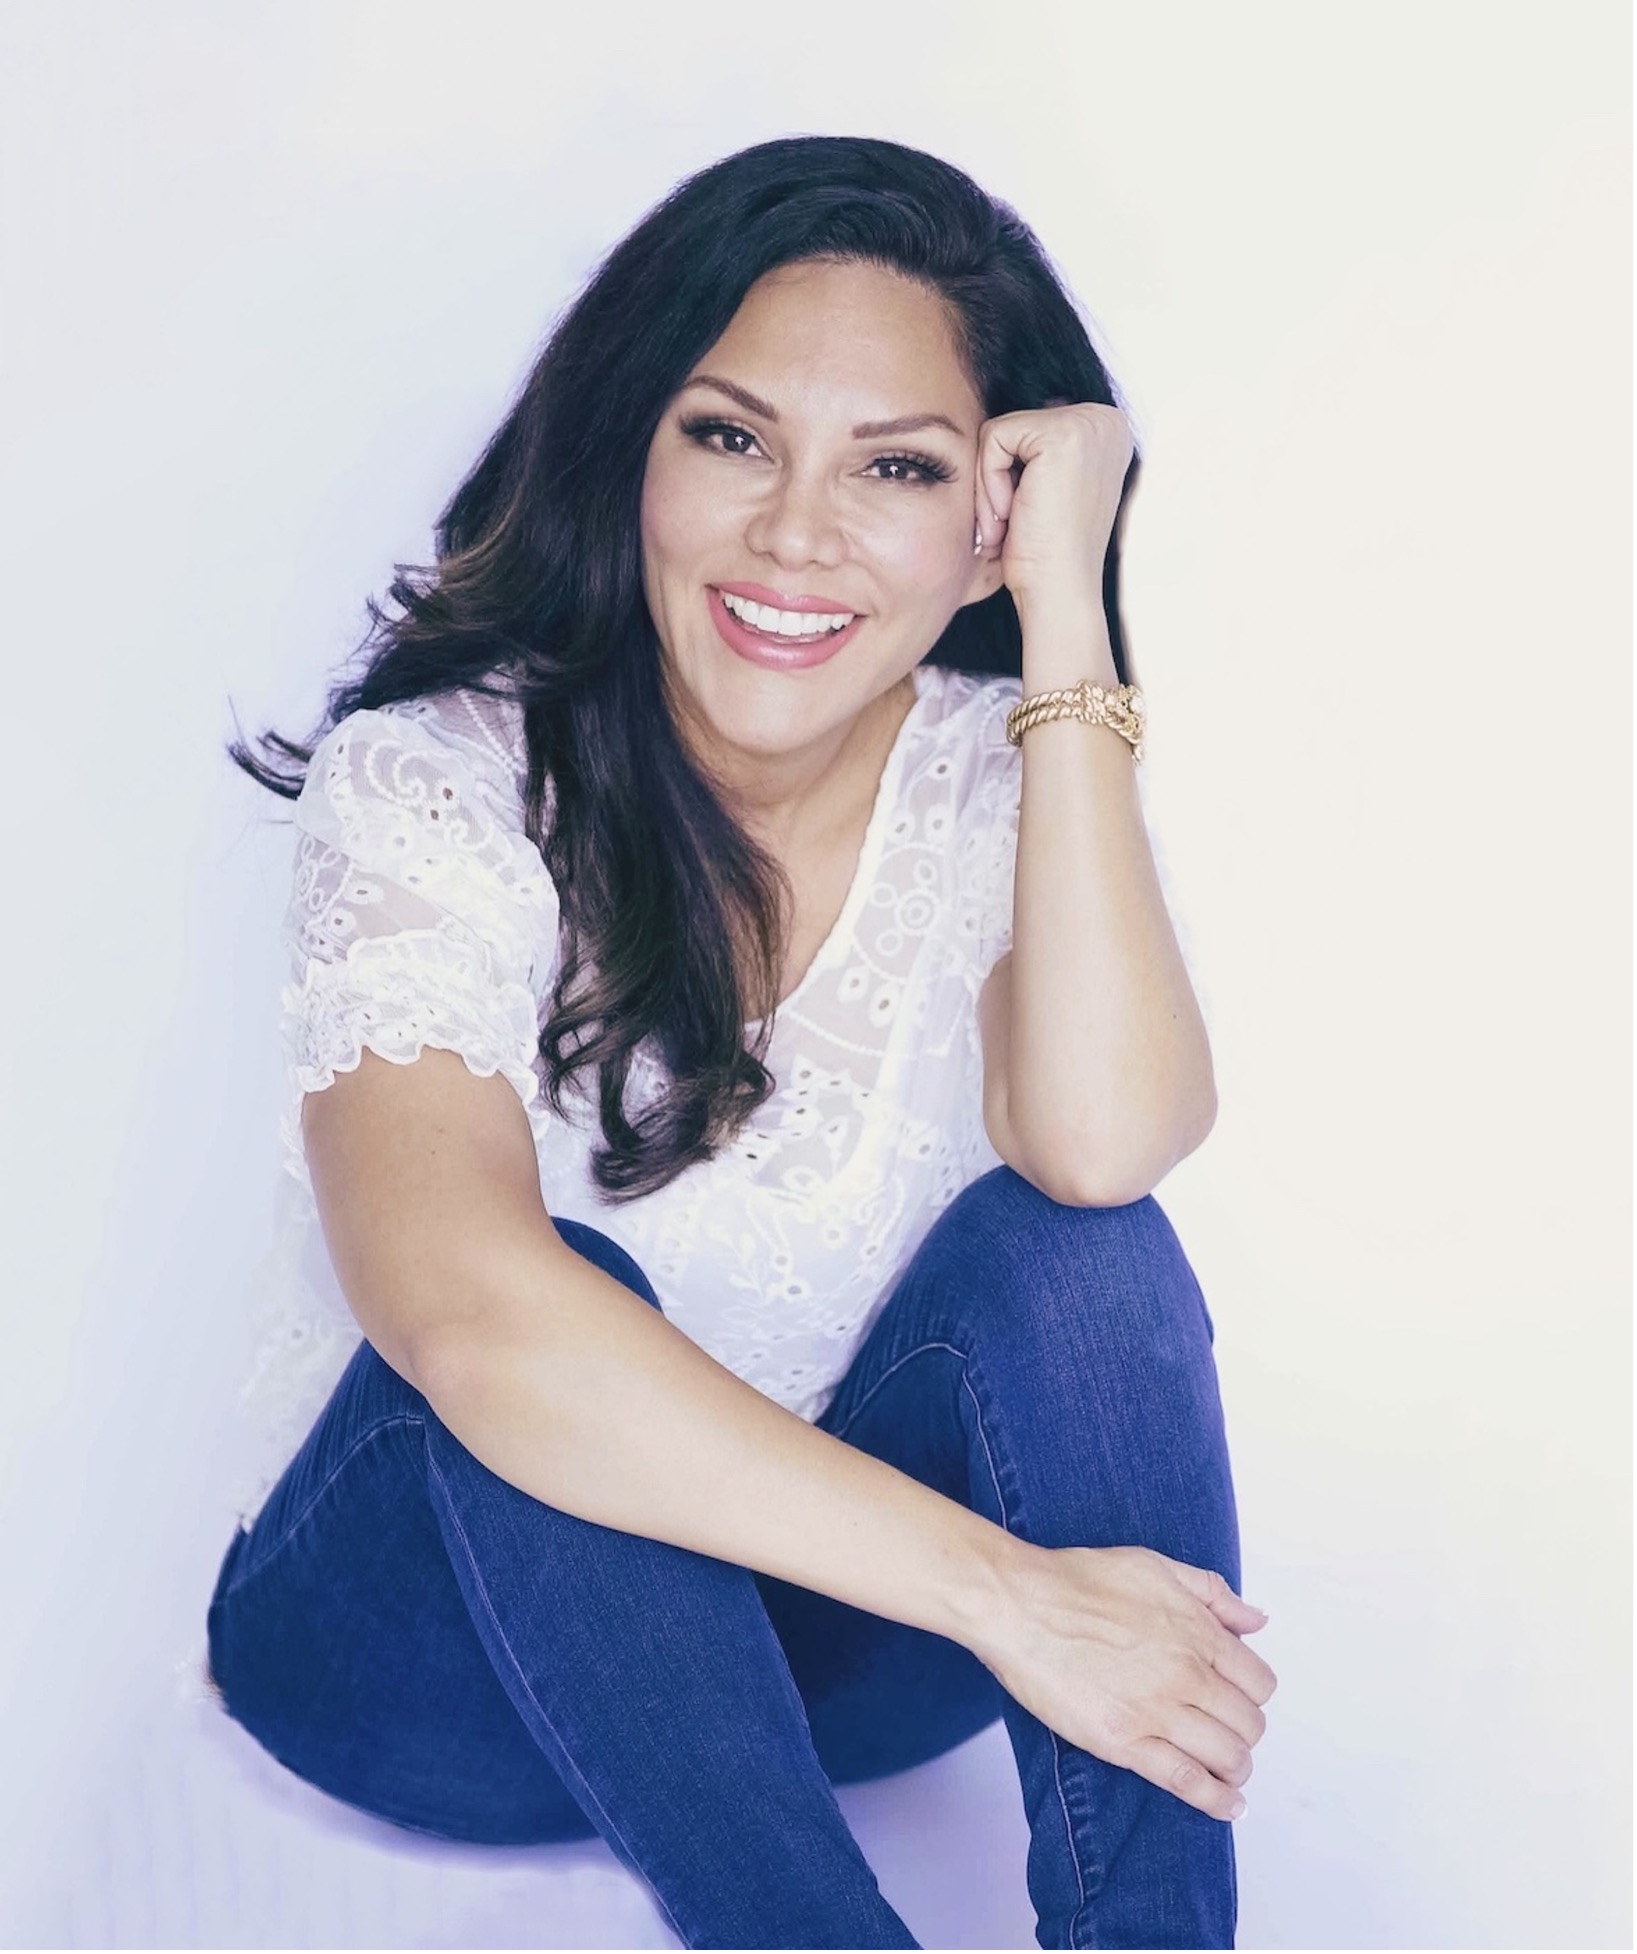 Sasha Carrion Launches Mindful Eating & Weight Release Program To Help Women Heal